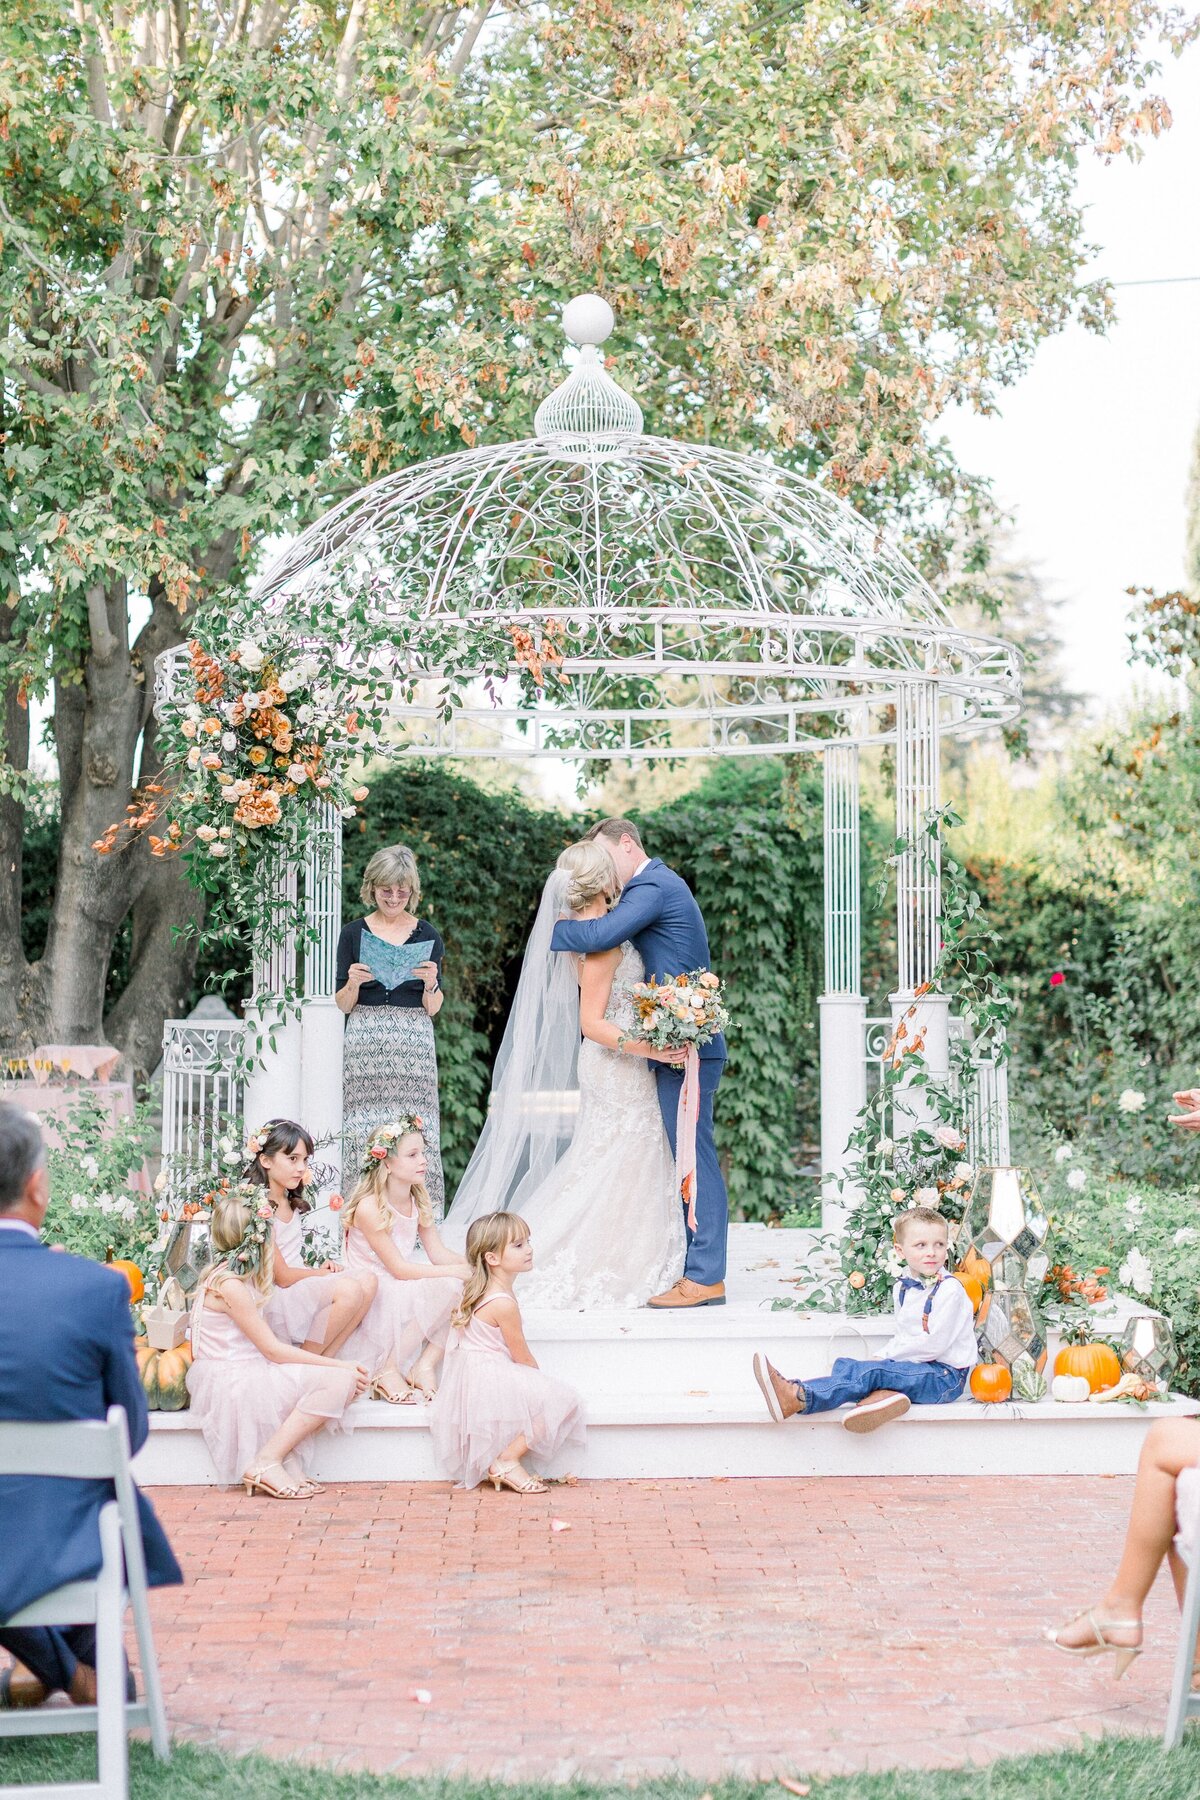 This wedding arbor is full of flowers and greenery.